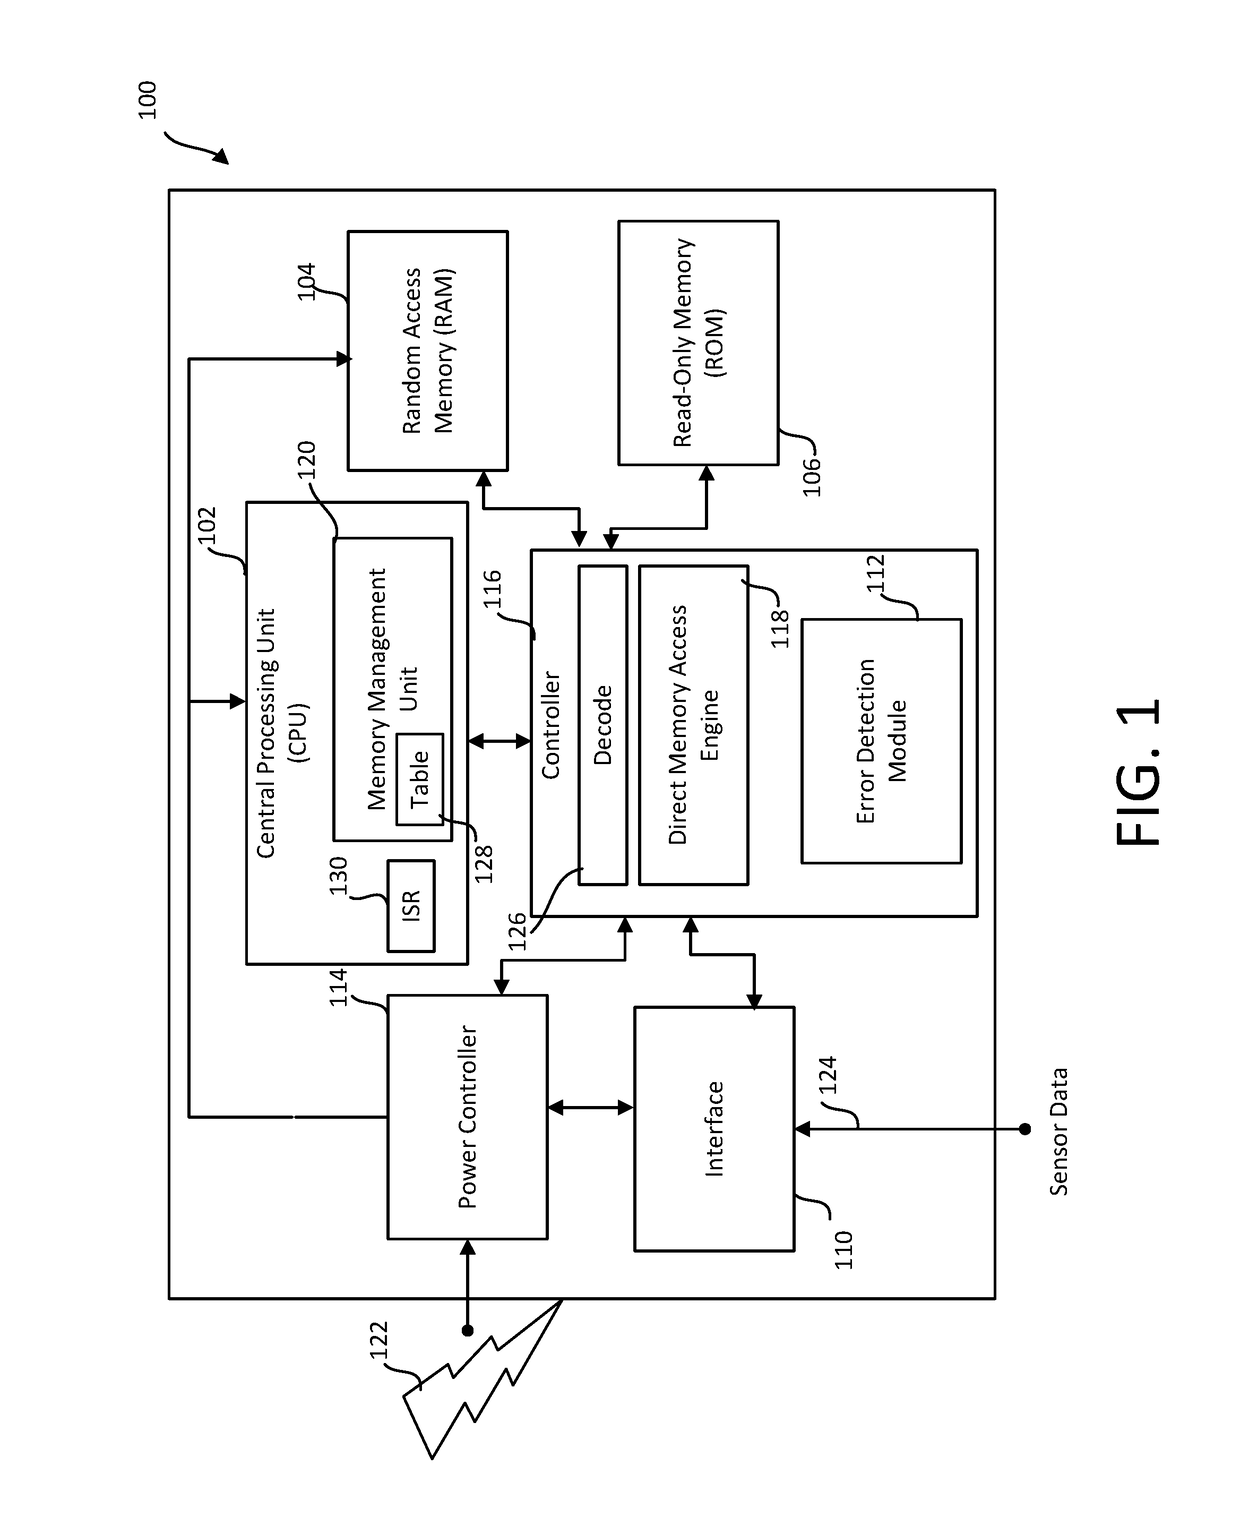 Central processing unit architecture and methods for high availability systems